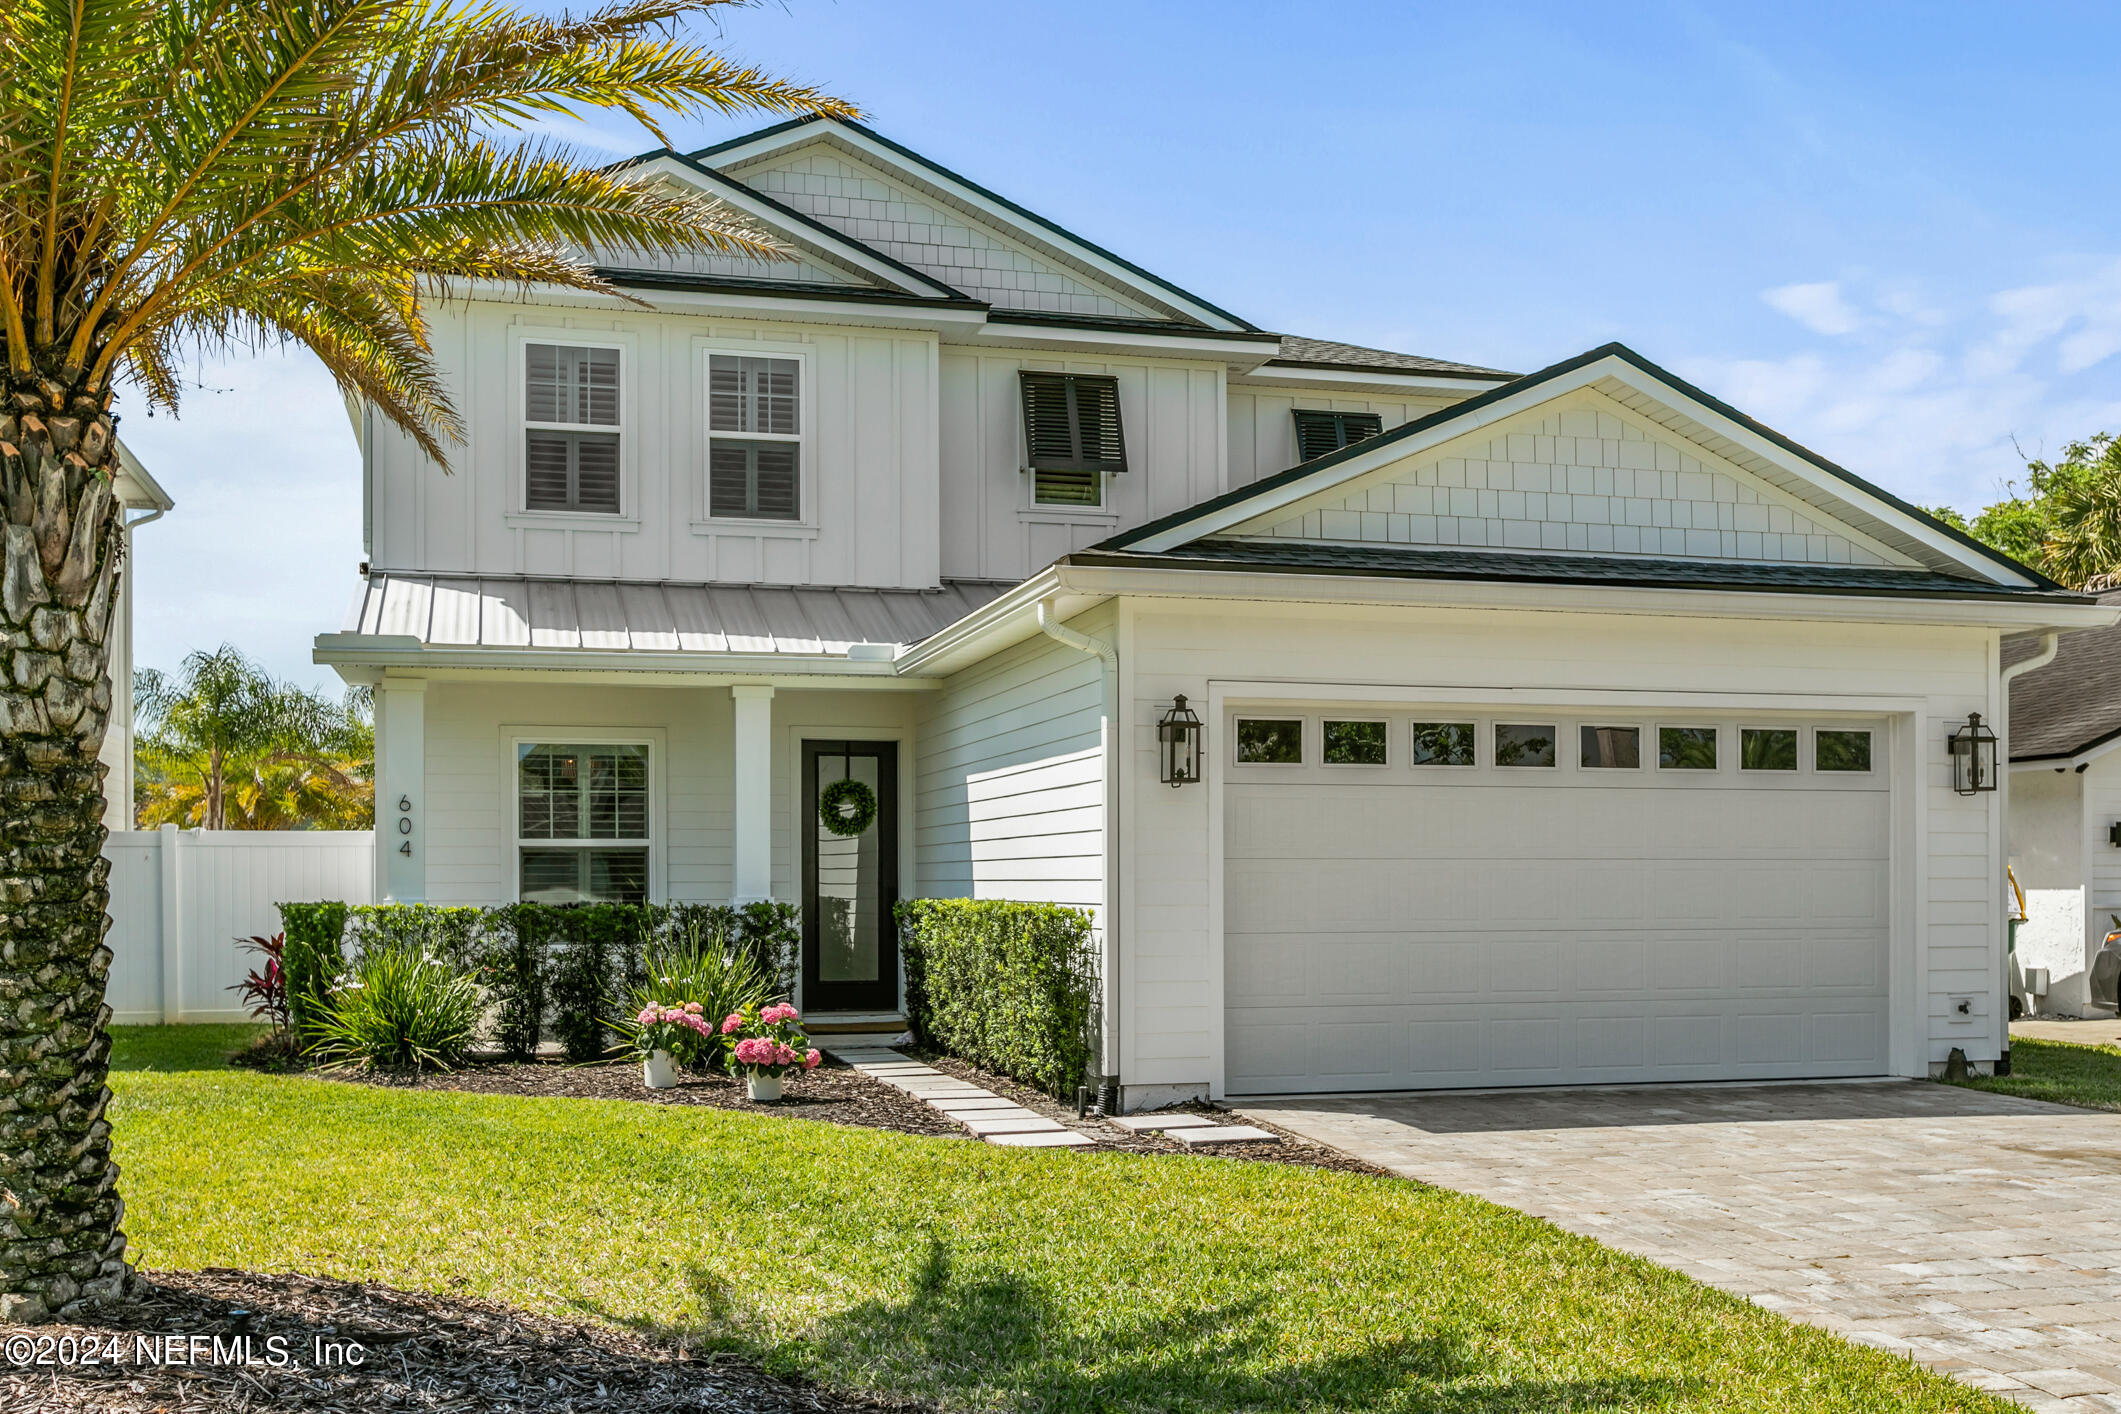 Jacksonville Beach, FL home for sale located at 604 5th Avenue N, Jacksonville Beach, FL 32250